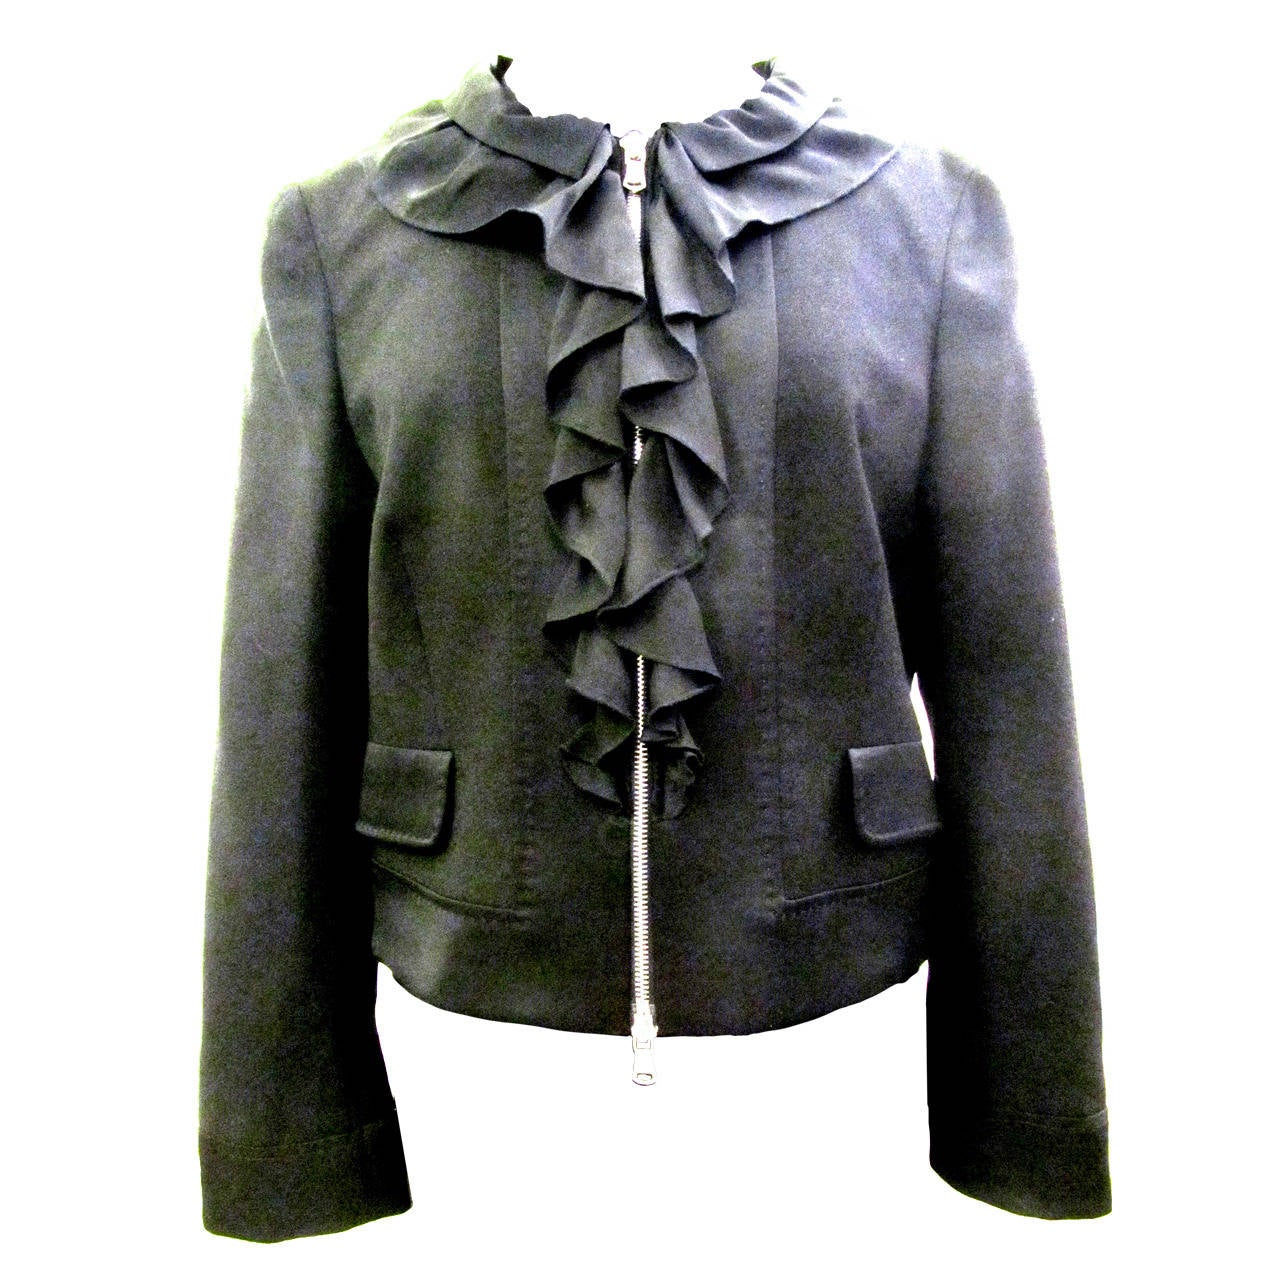 Moschino "Cheap and Chic" Jacket - Black Wool with Silk Crepe Trim For Sale